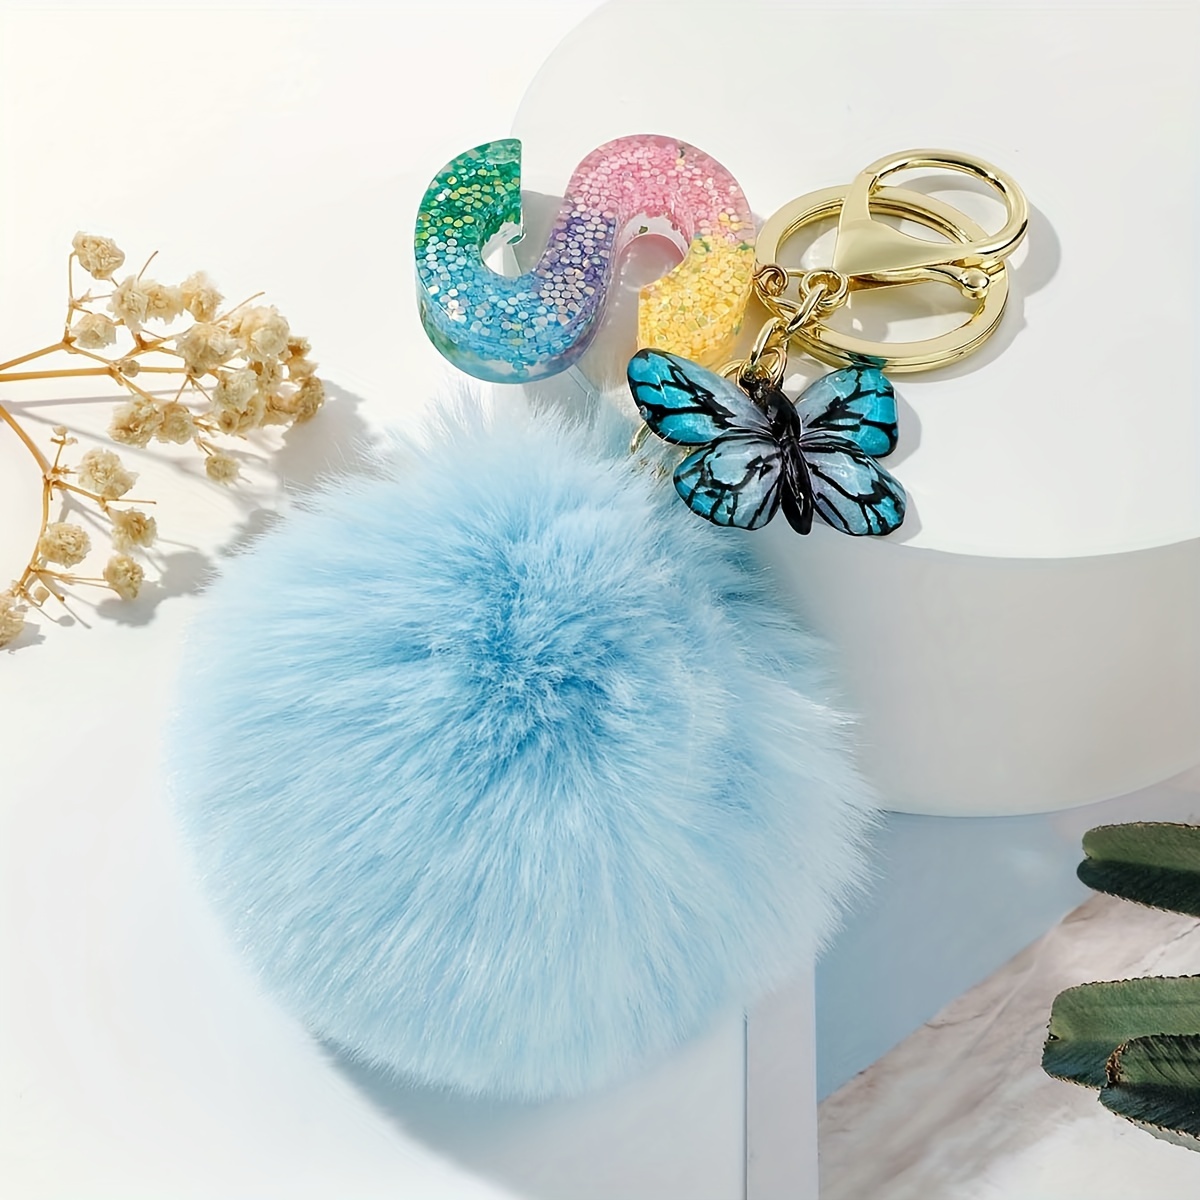 Alphabet Initial Letter F Pom Pom Keychain Cute Plush Key Chain Ring Purse  Bag Backpack Charm Earbud Case Cover Accessories Women Girls Gift